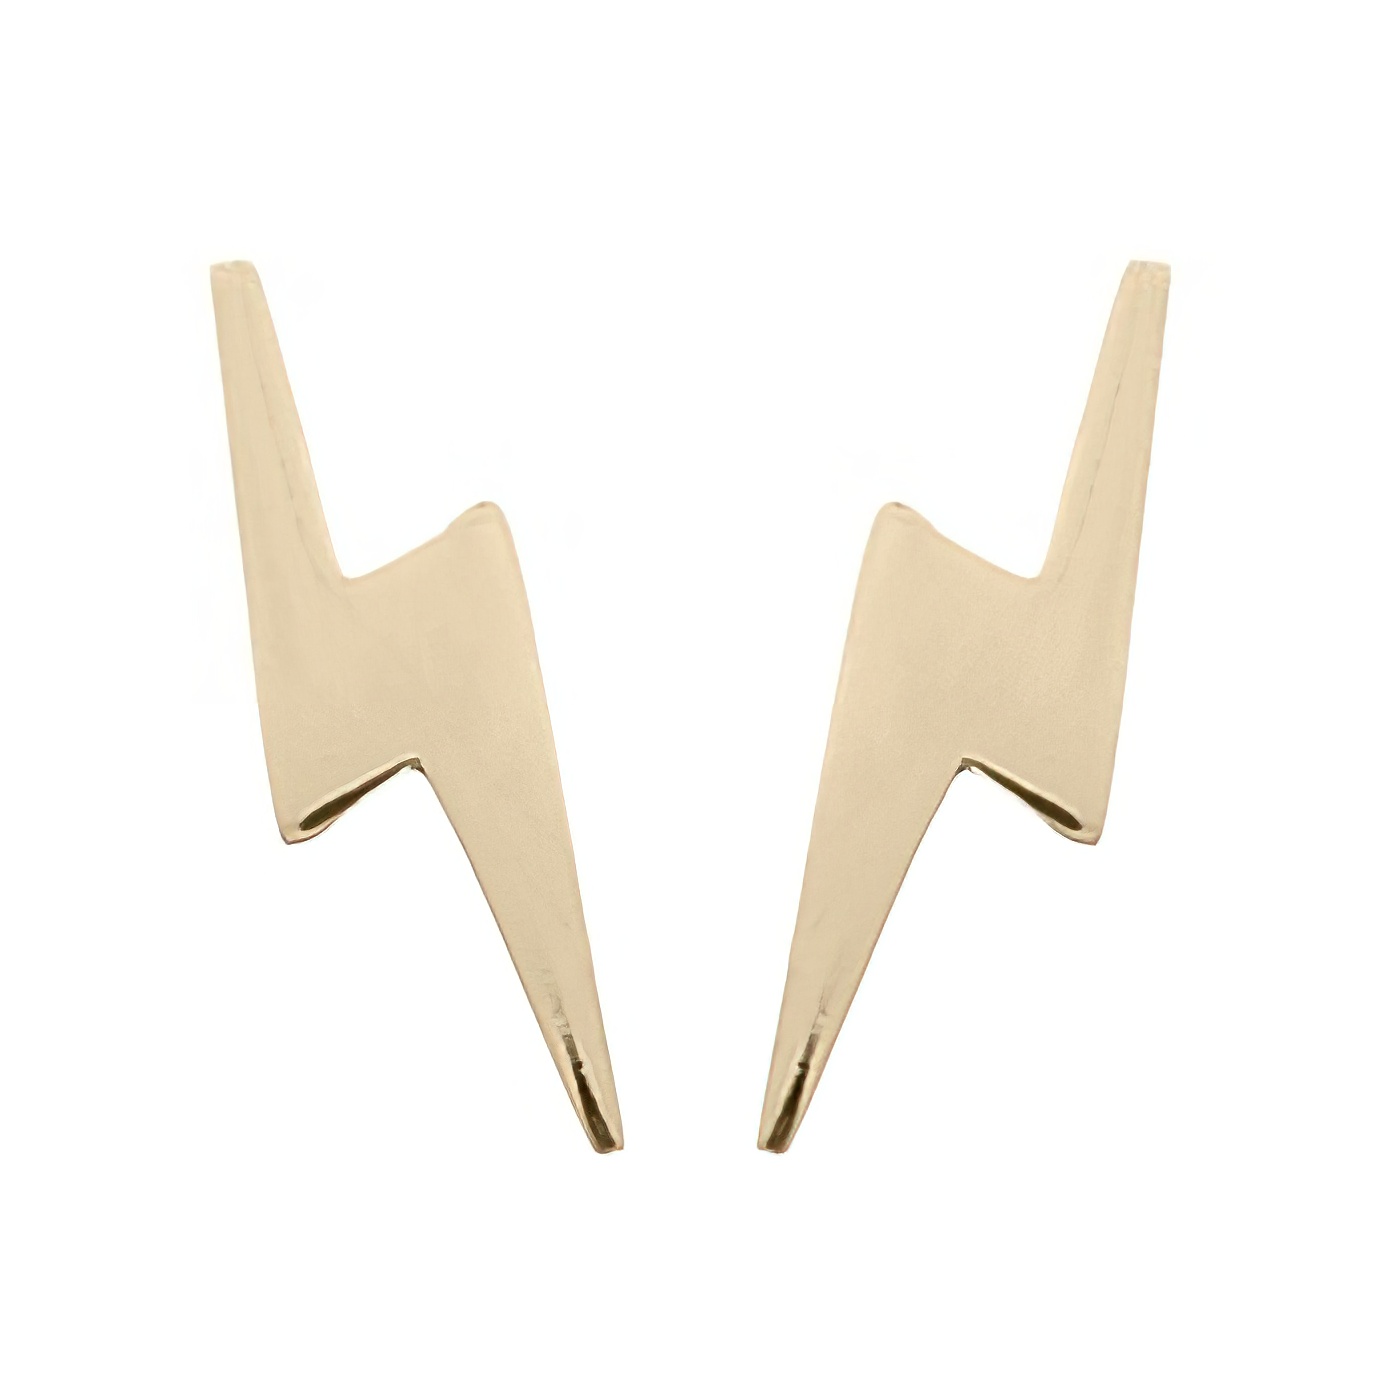 Brilliant Thunder Yellow Gold Plated 925 Silver Stud Earrings by BeYindi 